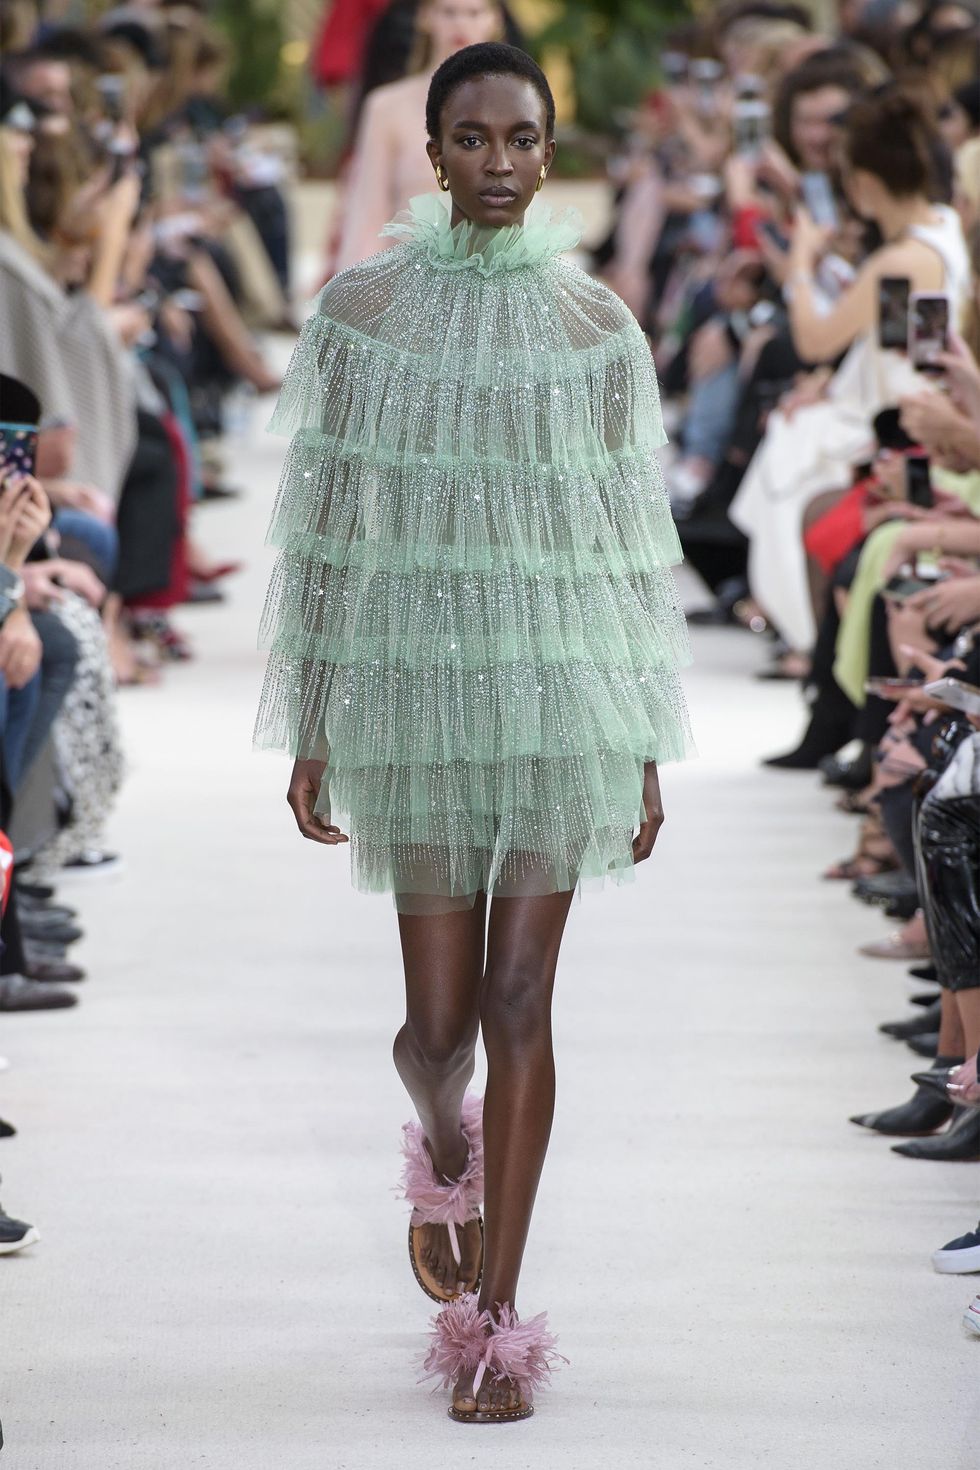 hbz-ss2019-trends-all-dolled-up-08-valentino-rs19-0948-1539195553.jpg